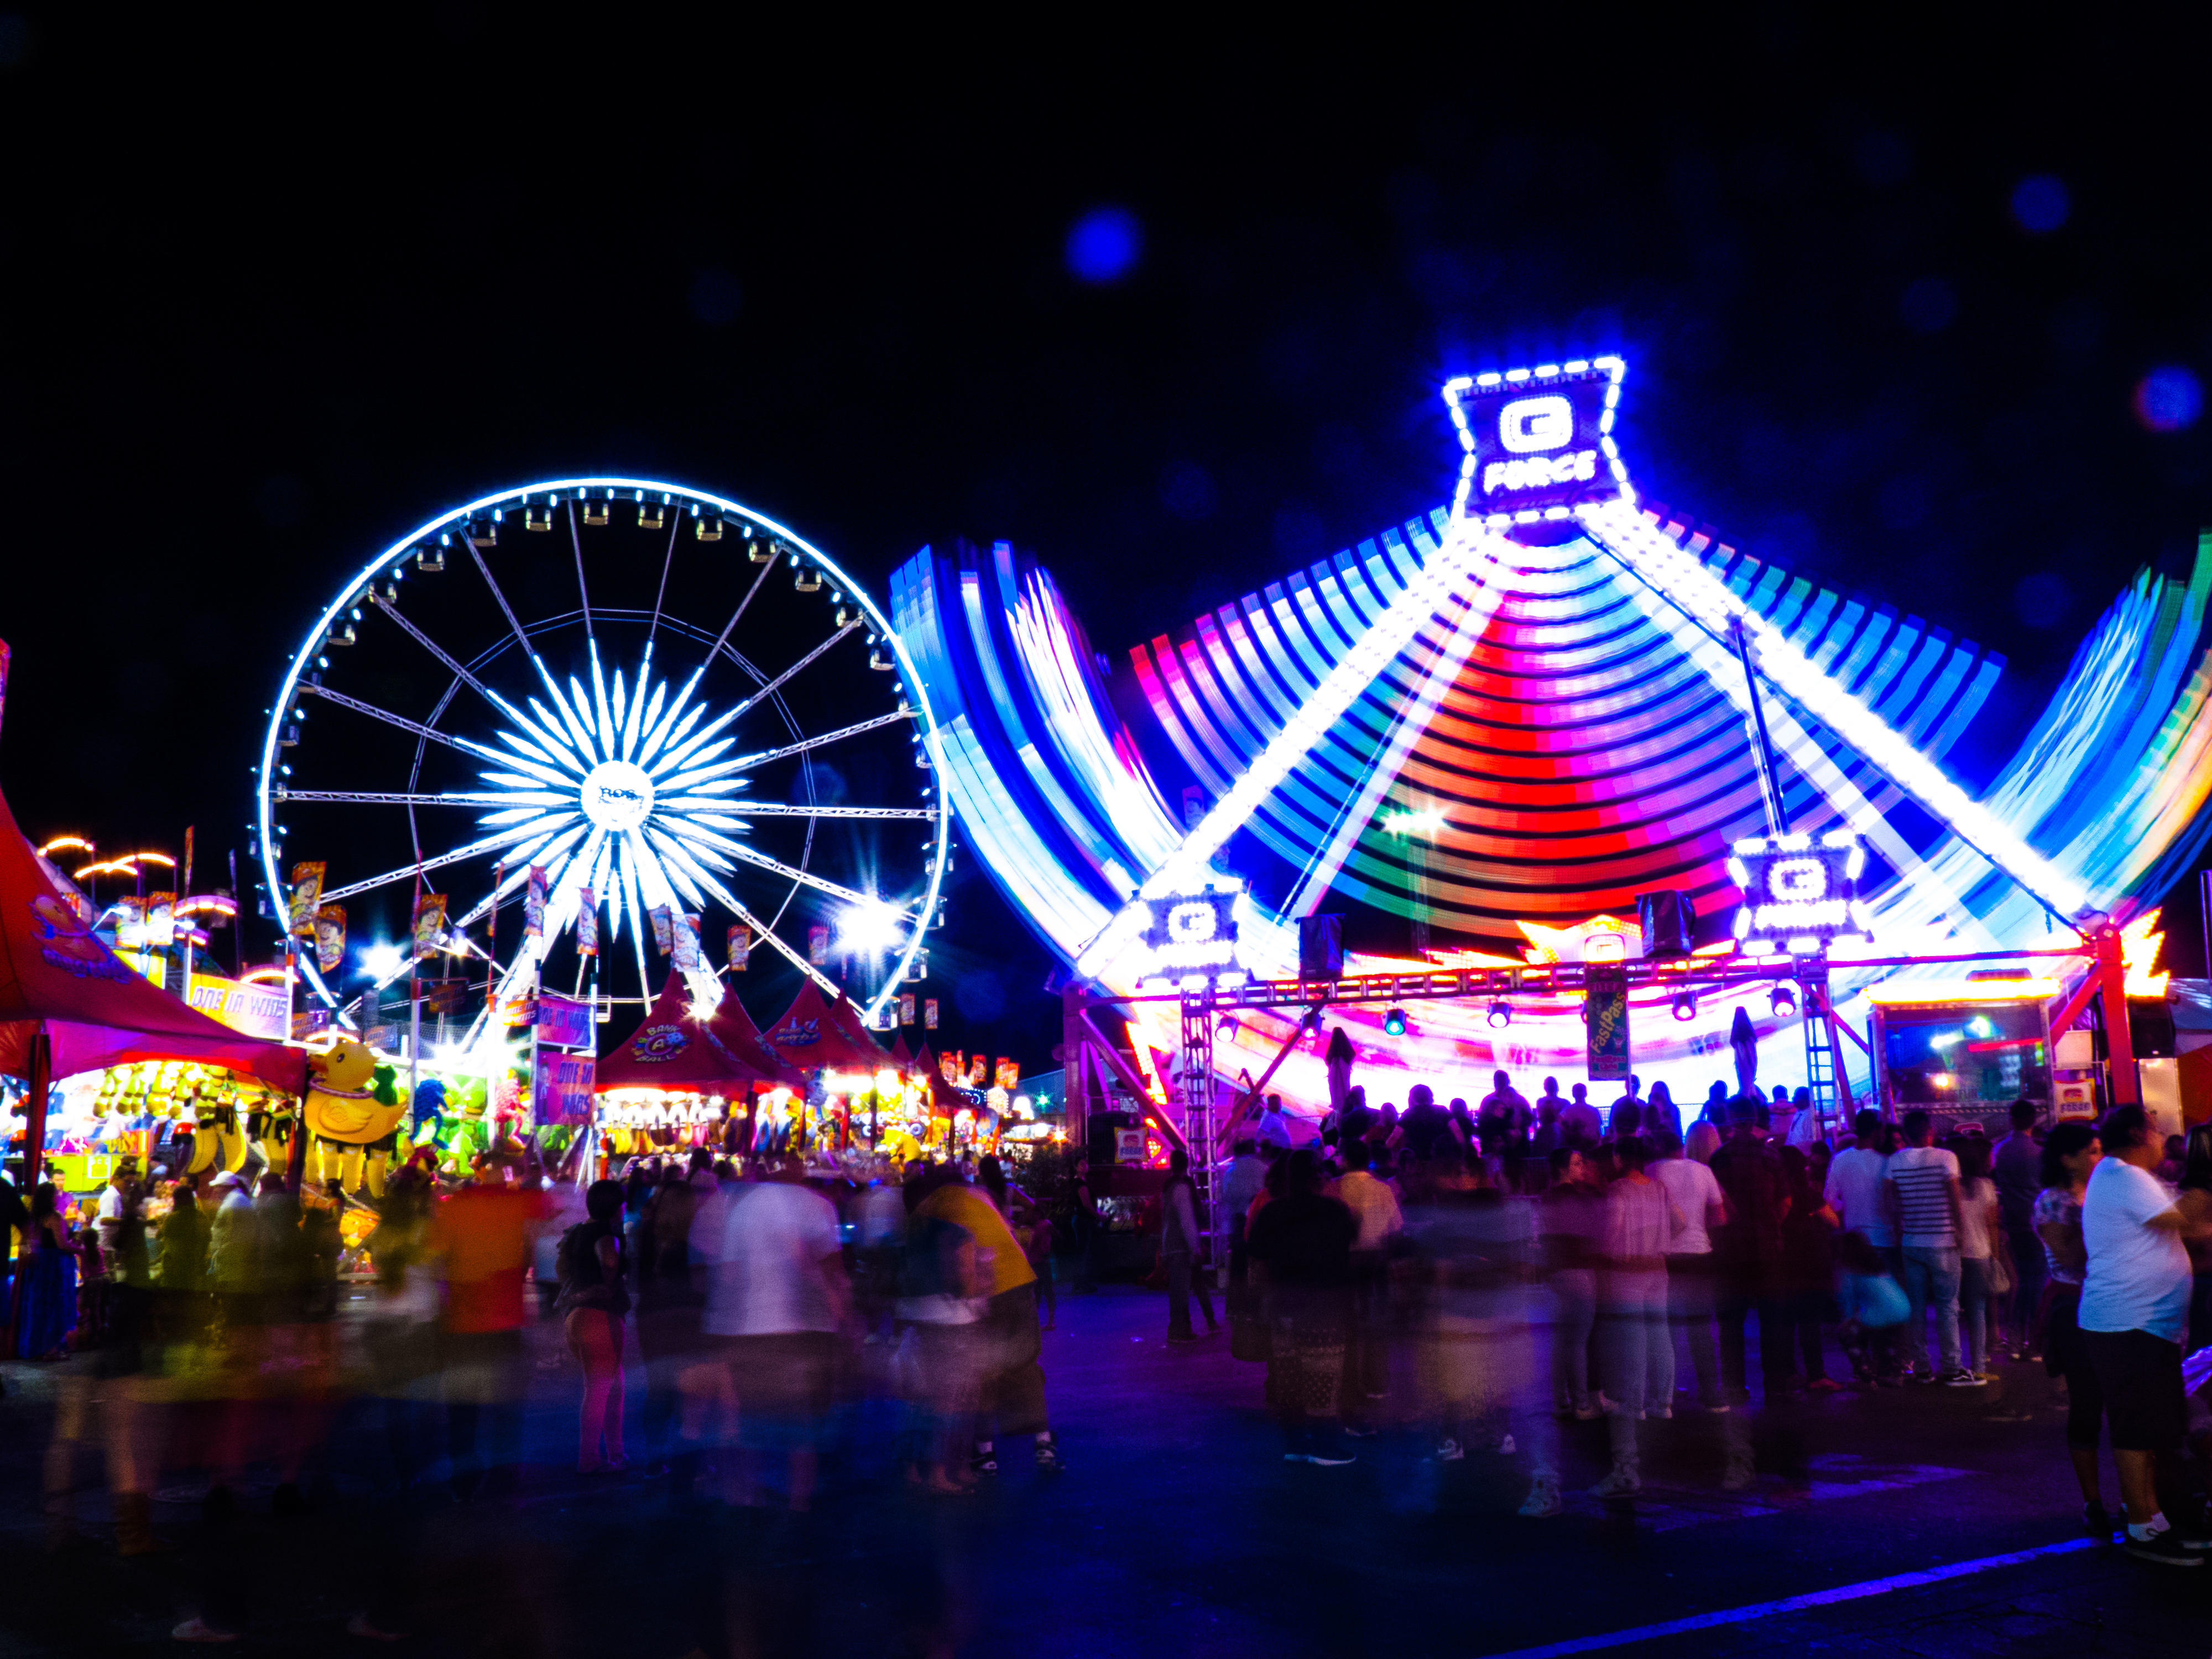 Night Photo of State Fair Rides and attractions where the Arizona State Photography Compeition will be held